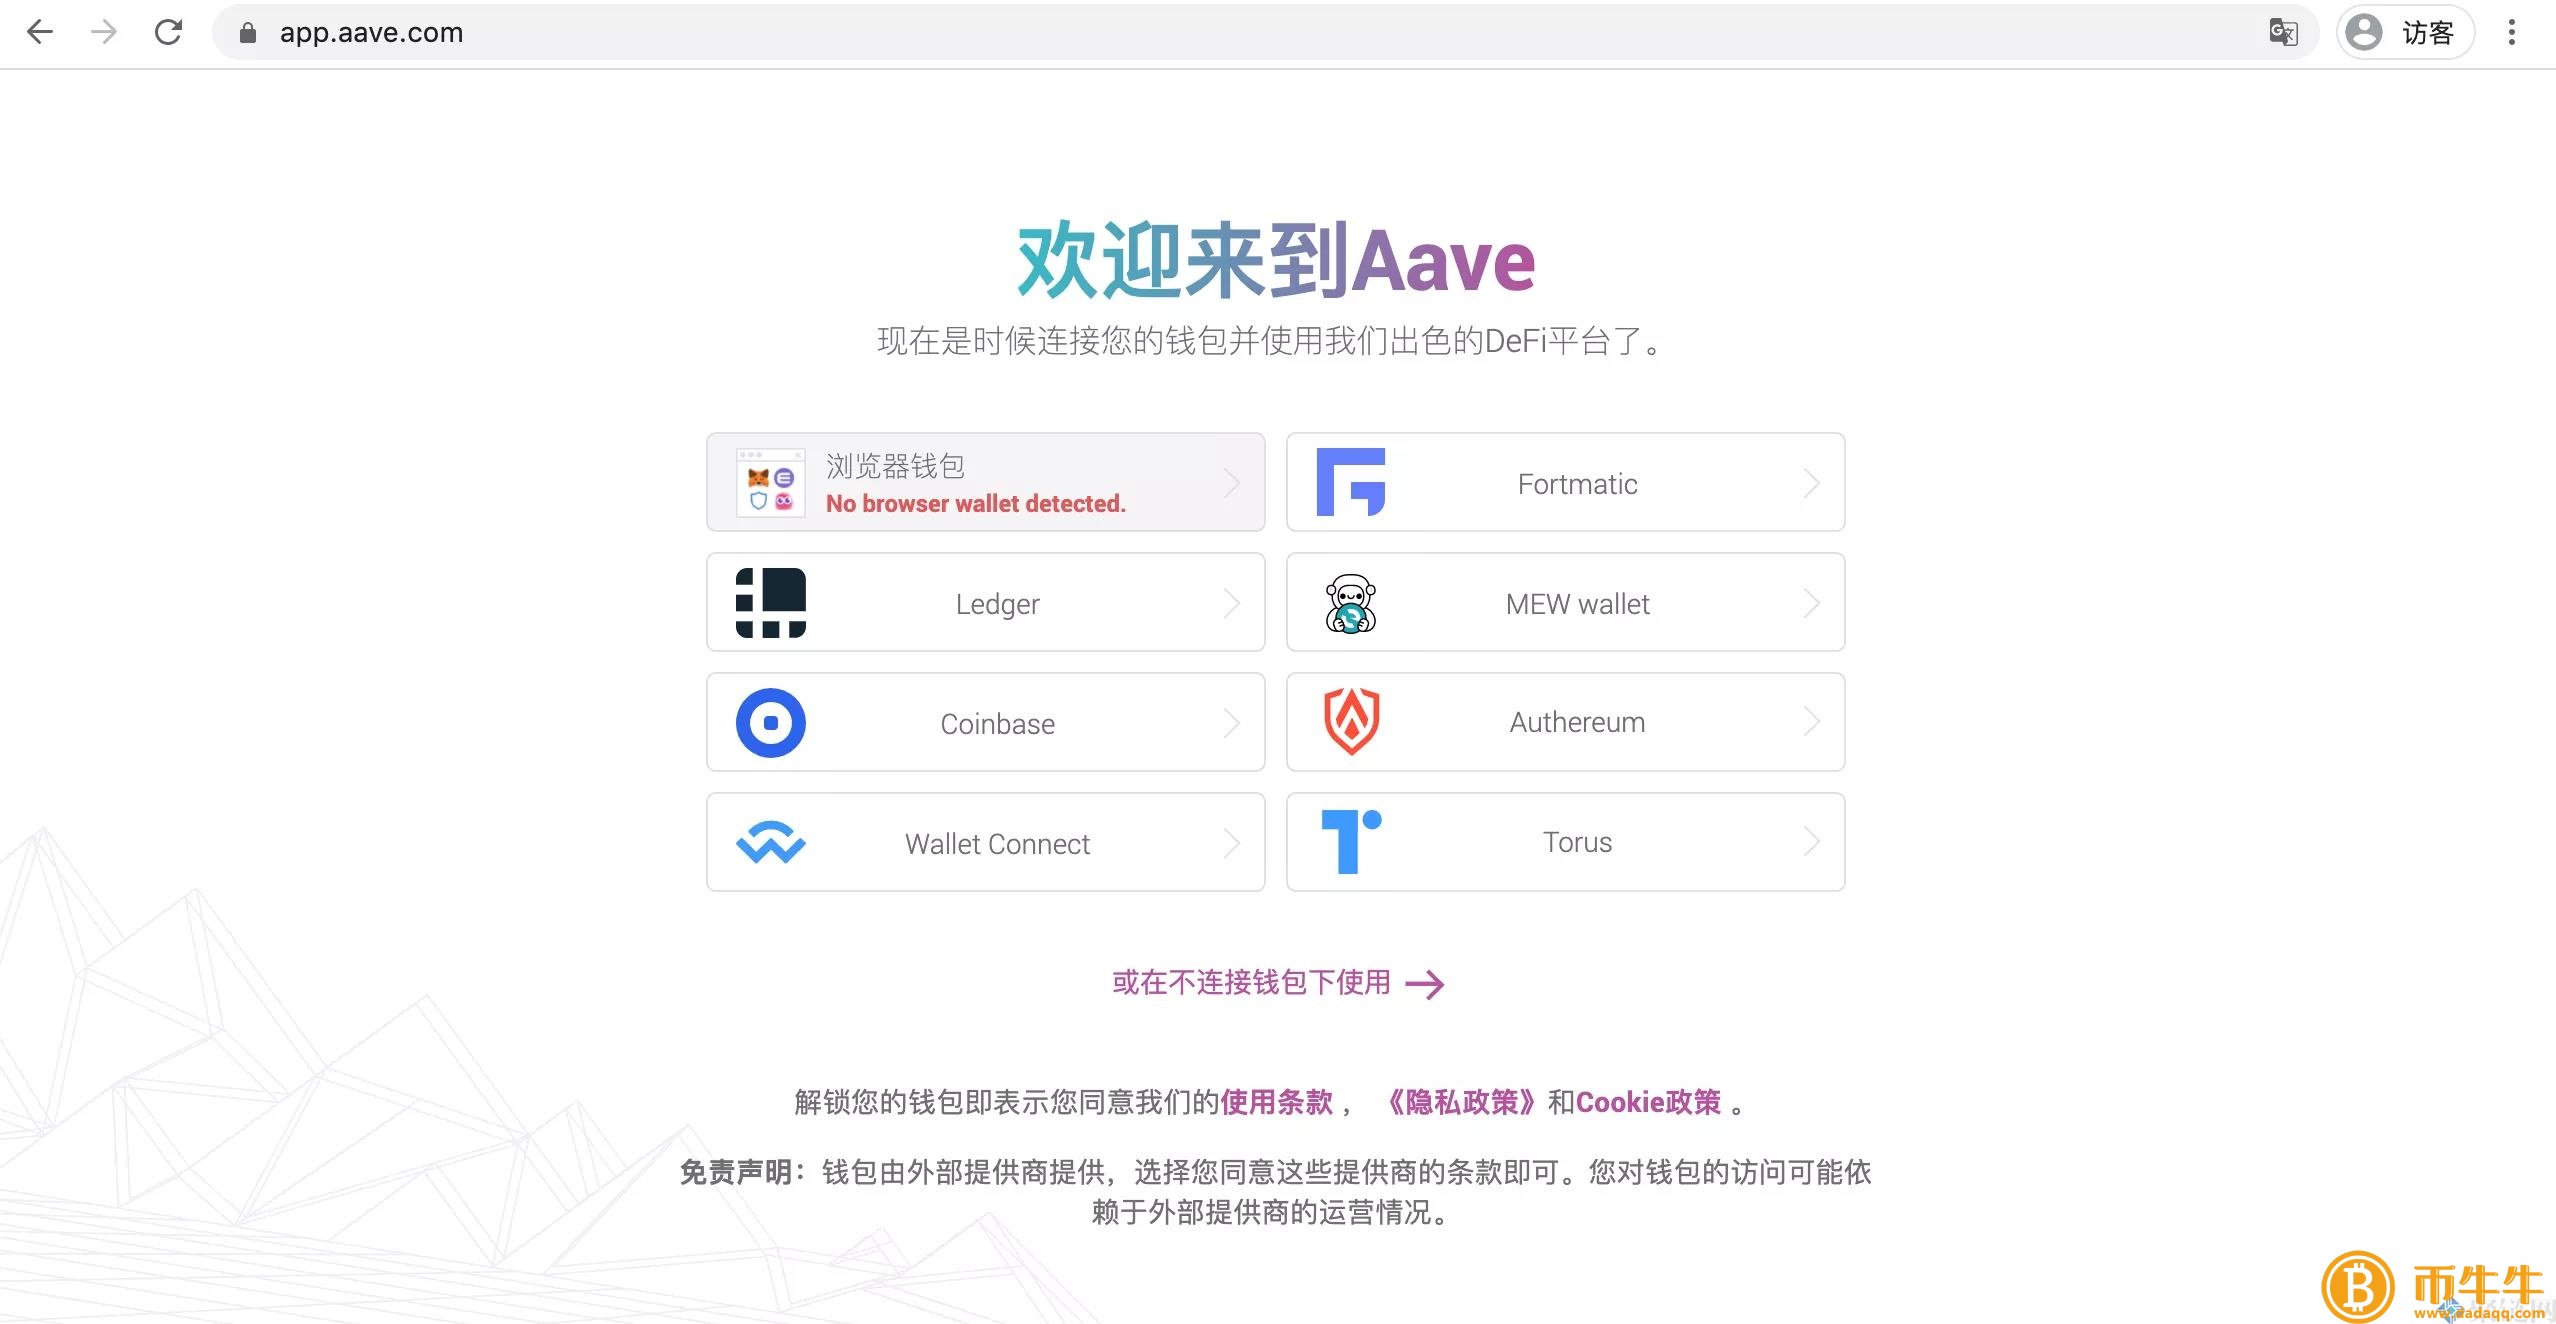 AAVE怎么挖矿？AAVE币挖矿教程